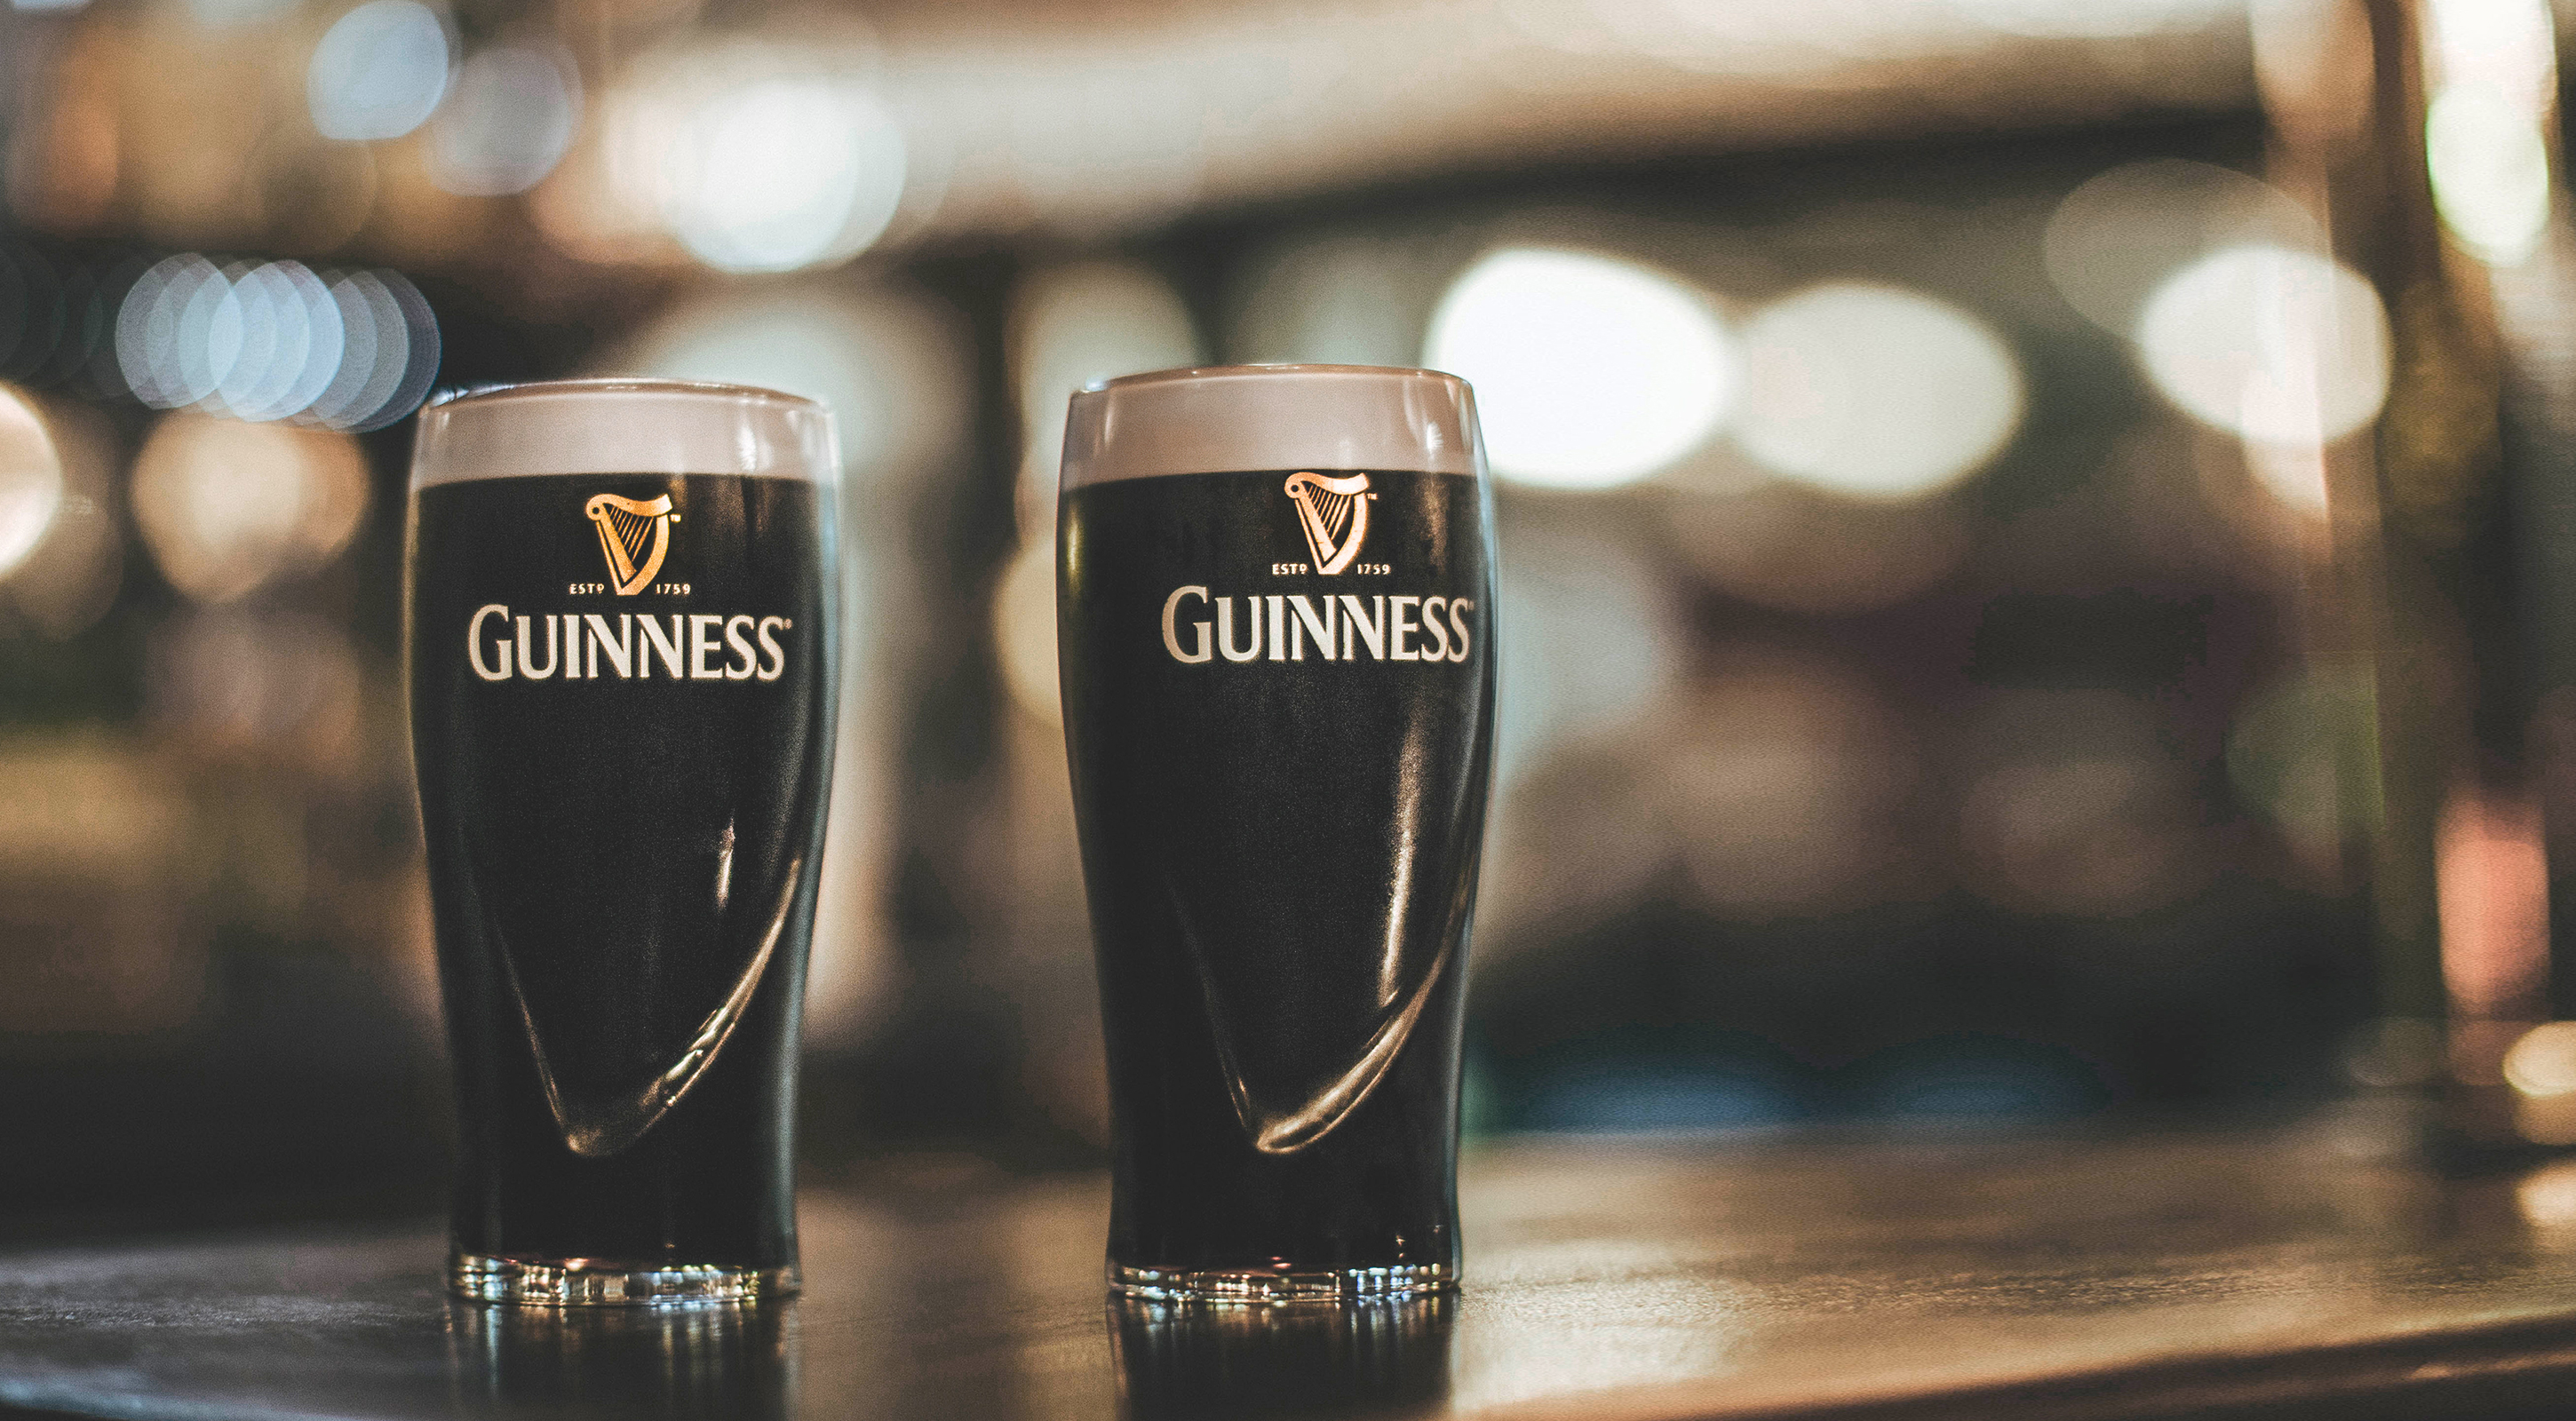 Two pints of Guinness on a bar